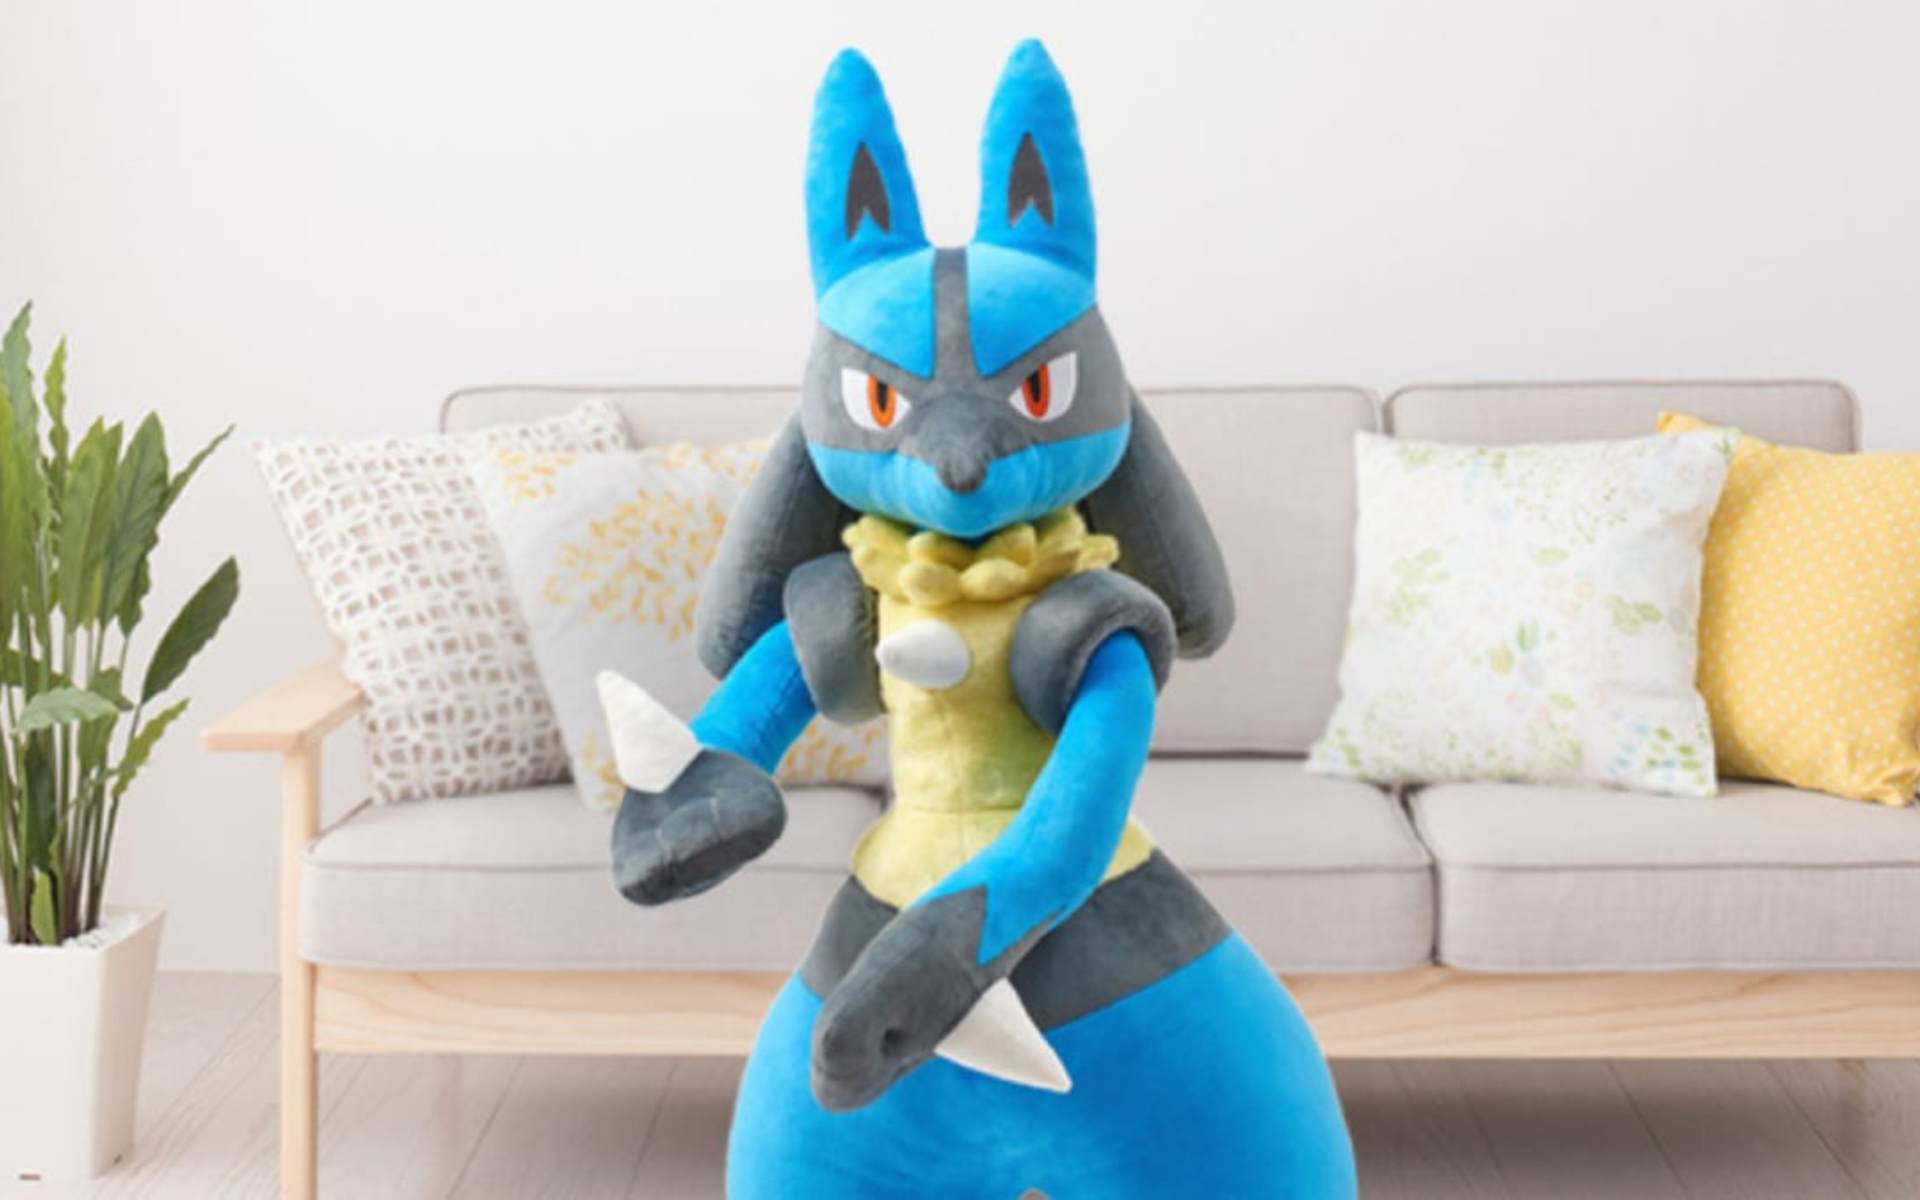 Lucario life size plush is on sale in Japan for 400 min min